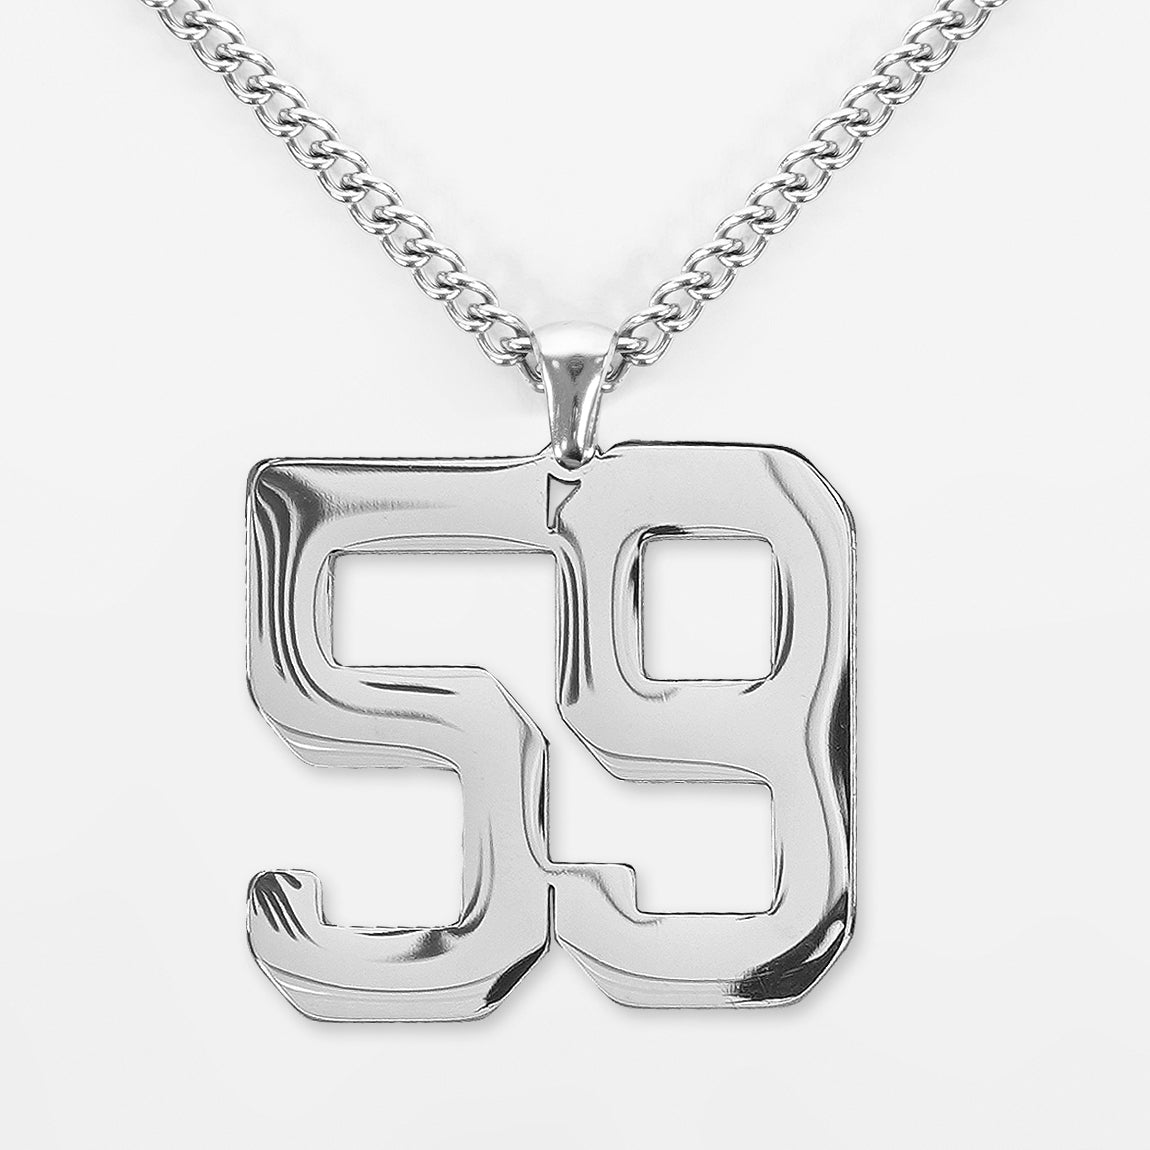 59 Number Pendant with Chain Necklace - Stainless Steel